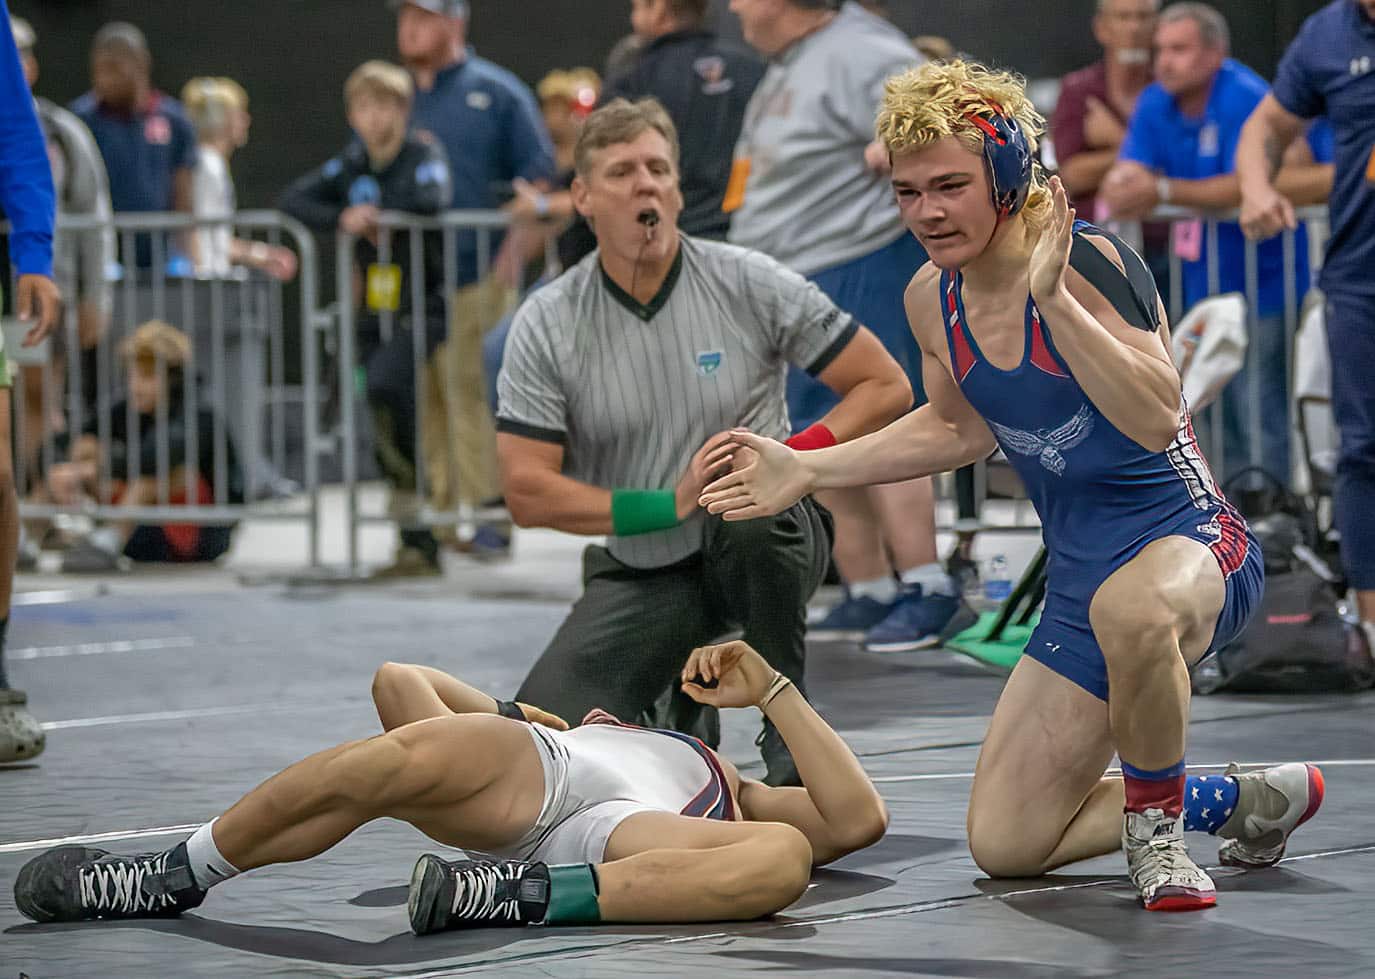 Springstead High’s 138-pound competitor, Josh Gallo celebrates after a last-second win over Austin Chang from Freedom High 6-4 at the FHSAA IBT Championships in Kissimmee. Photo by JOE DiCRISTOFALO